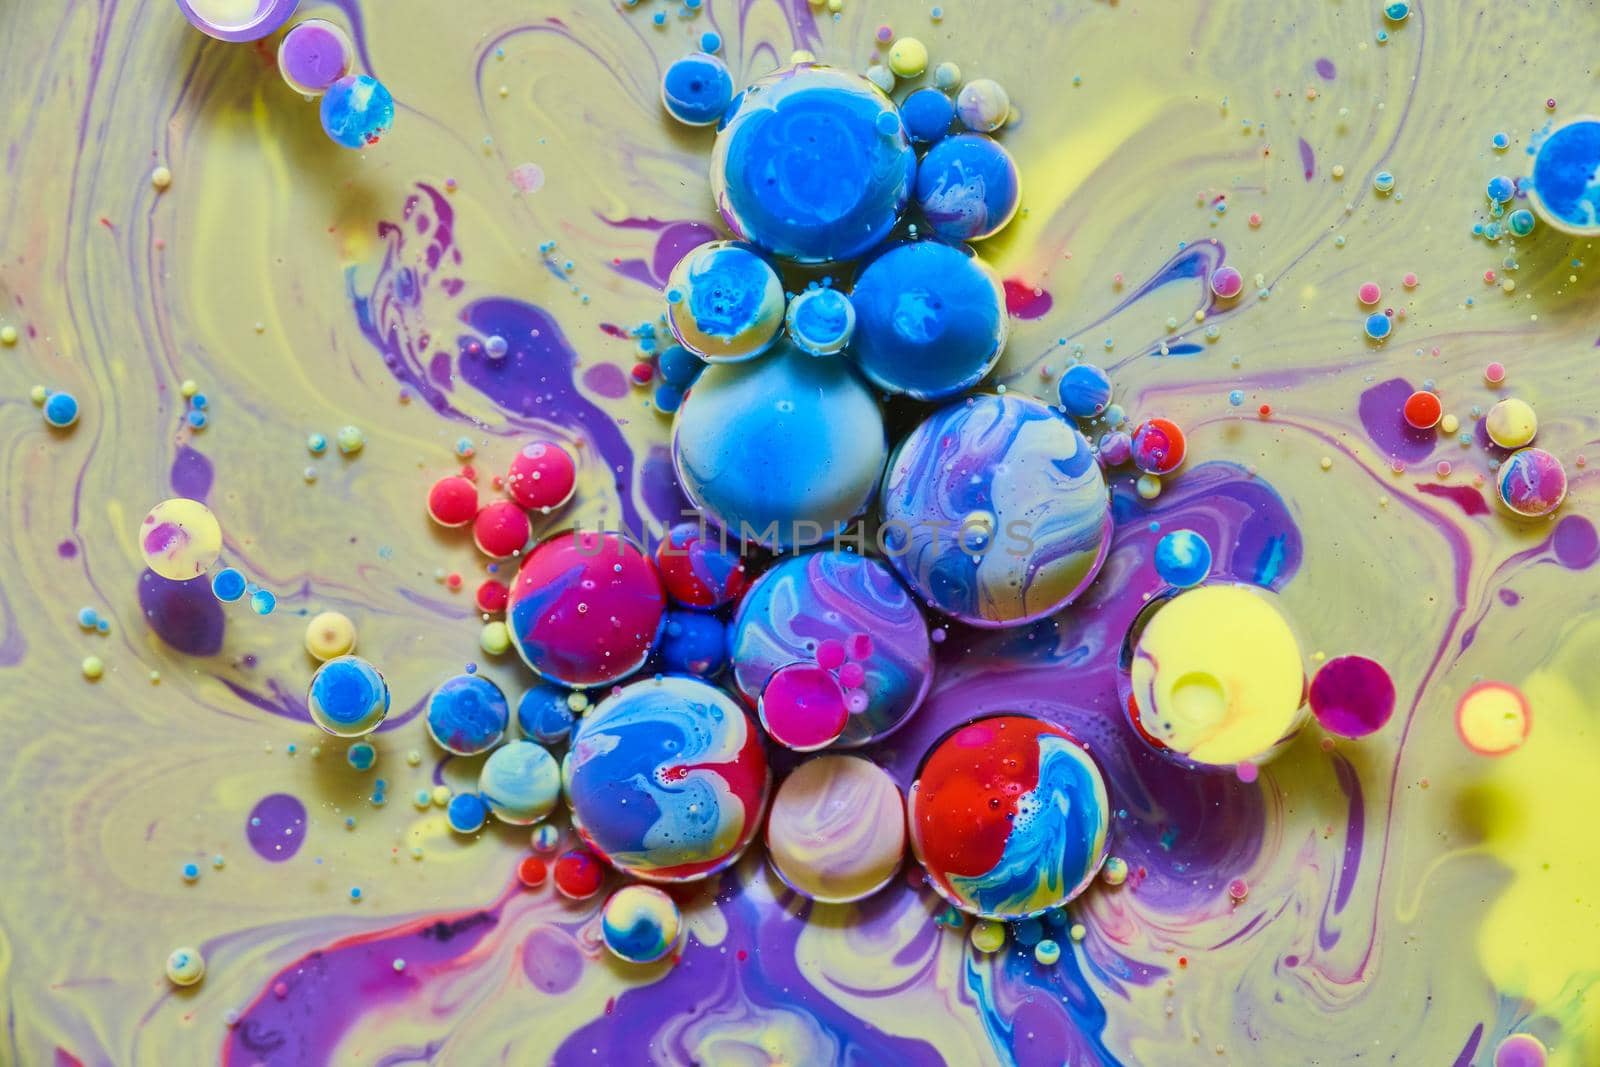 Yellow and purple silky surface with colorful rainbow orbs by njproductions